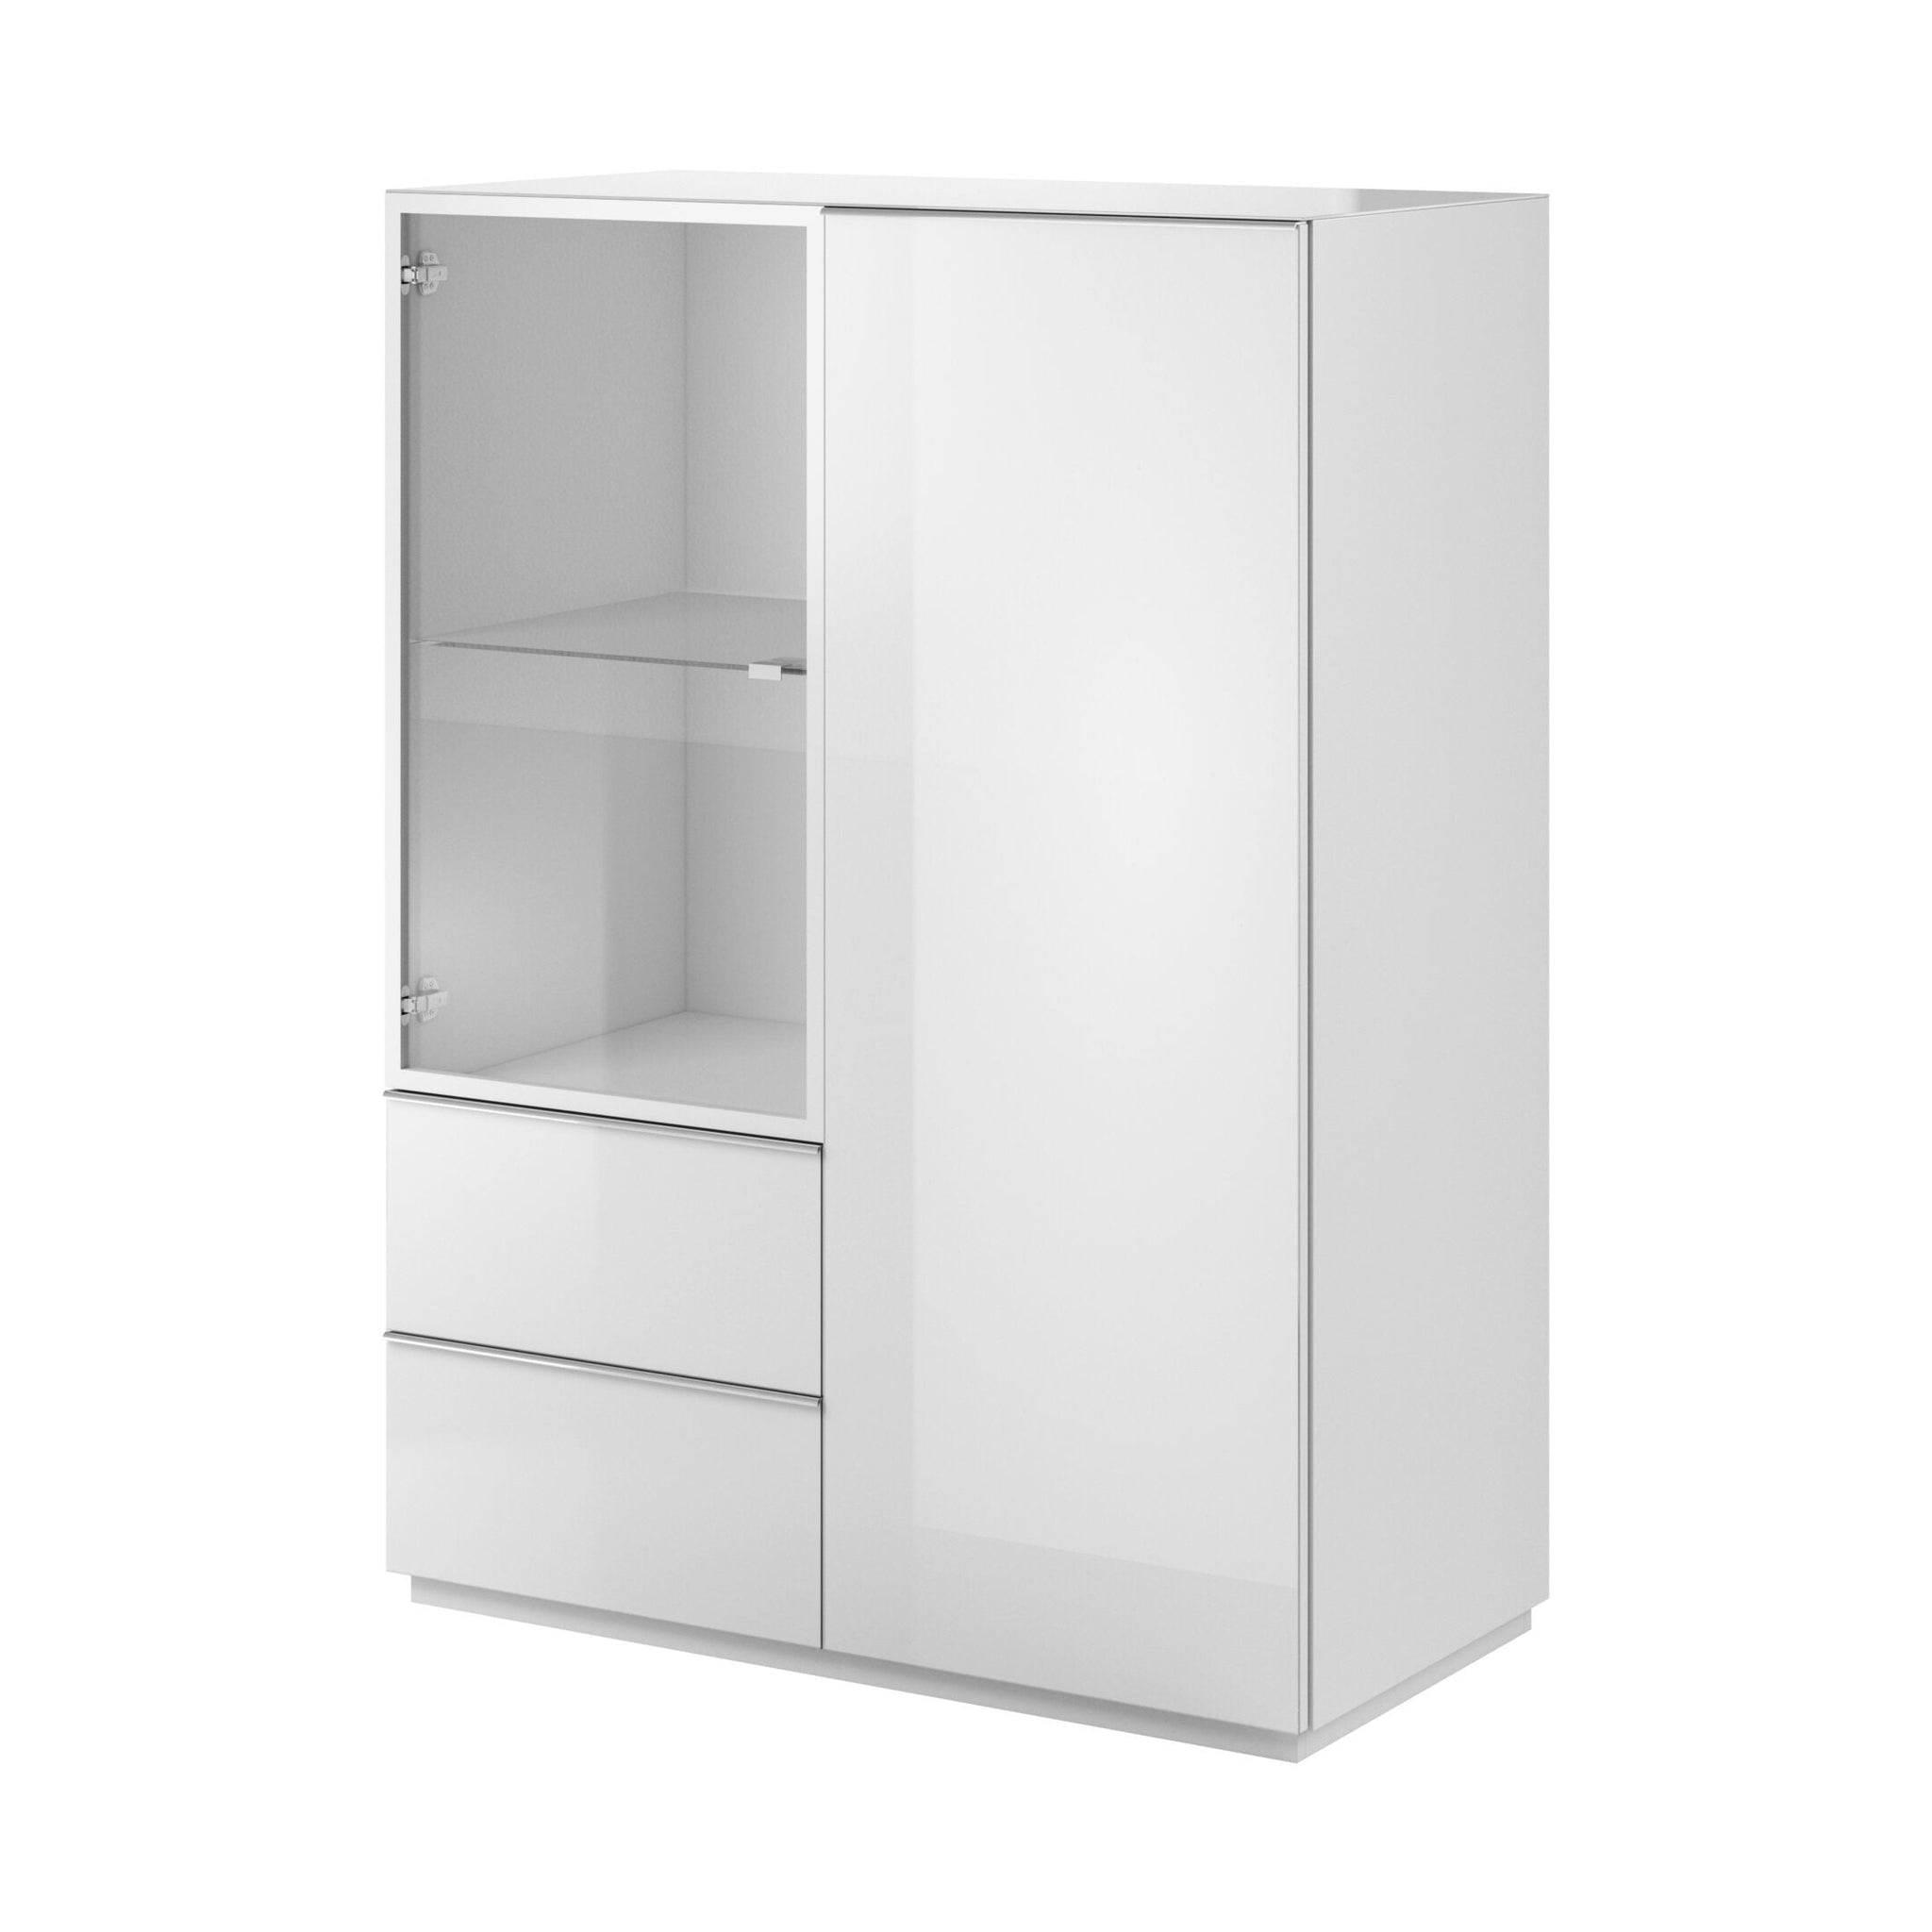 Helio 44 Display Cabinet White Glass Living Room Display Cabinet 